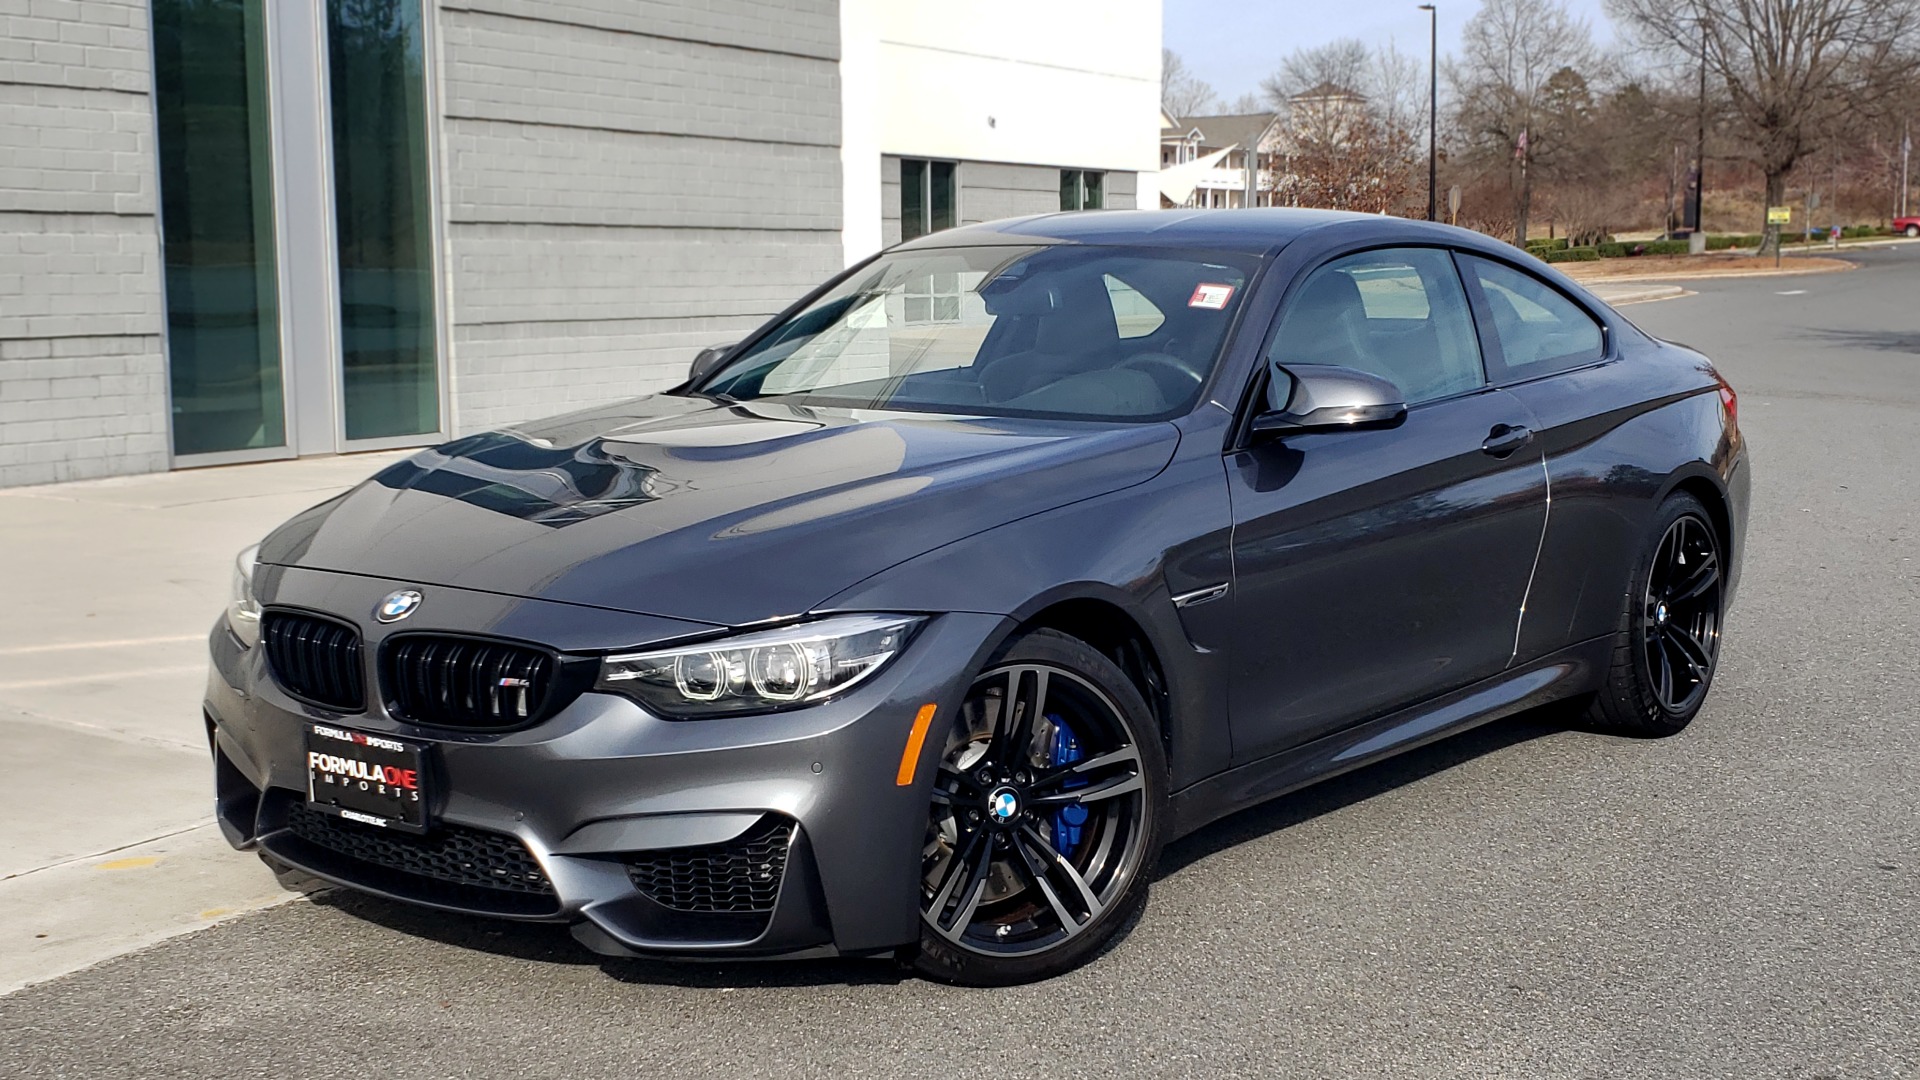 Used 2019 BMW M4 COUPE 3.0L 425HP / 7-SPD AUTO / NAV / 19-IN WHEELS /  REARVIEW For Sale ($66,295) | Formula Imports Stock #F11588